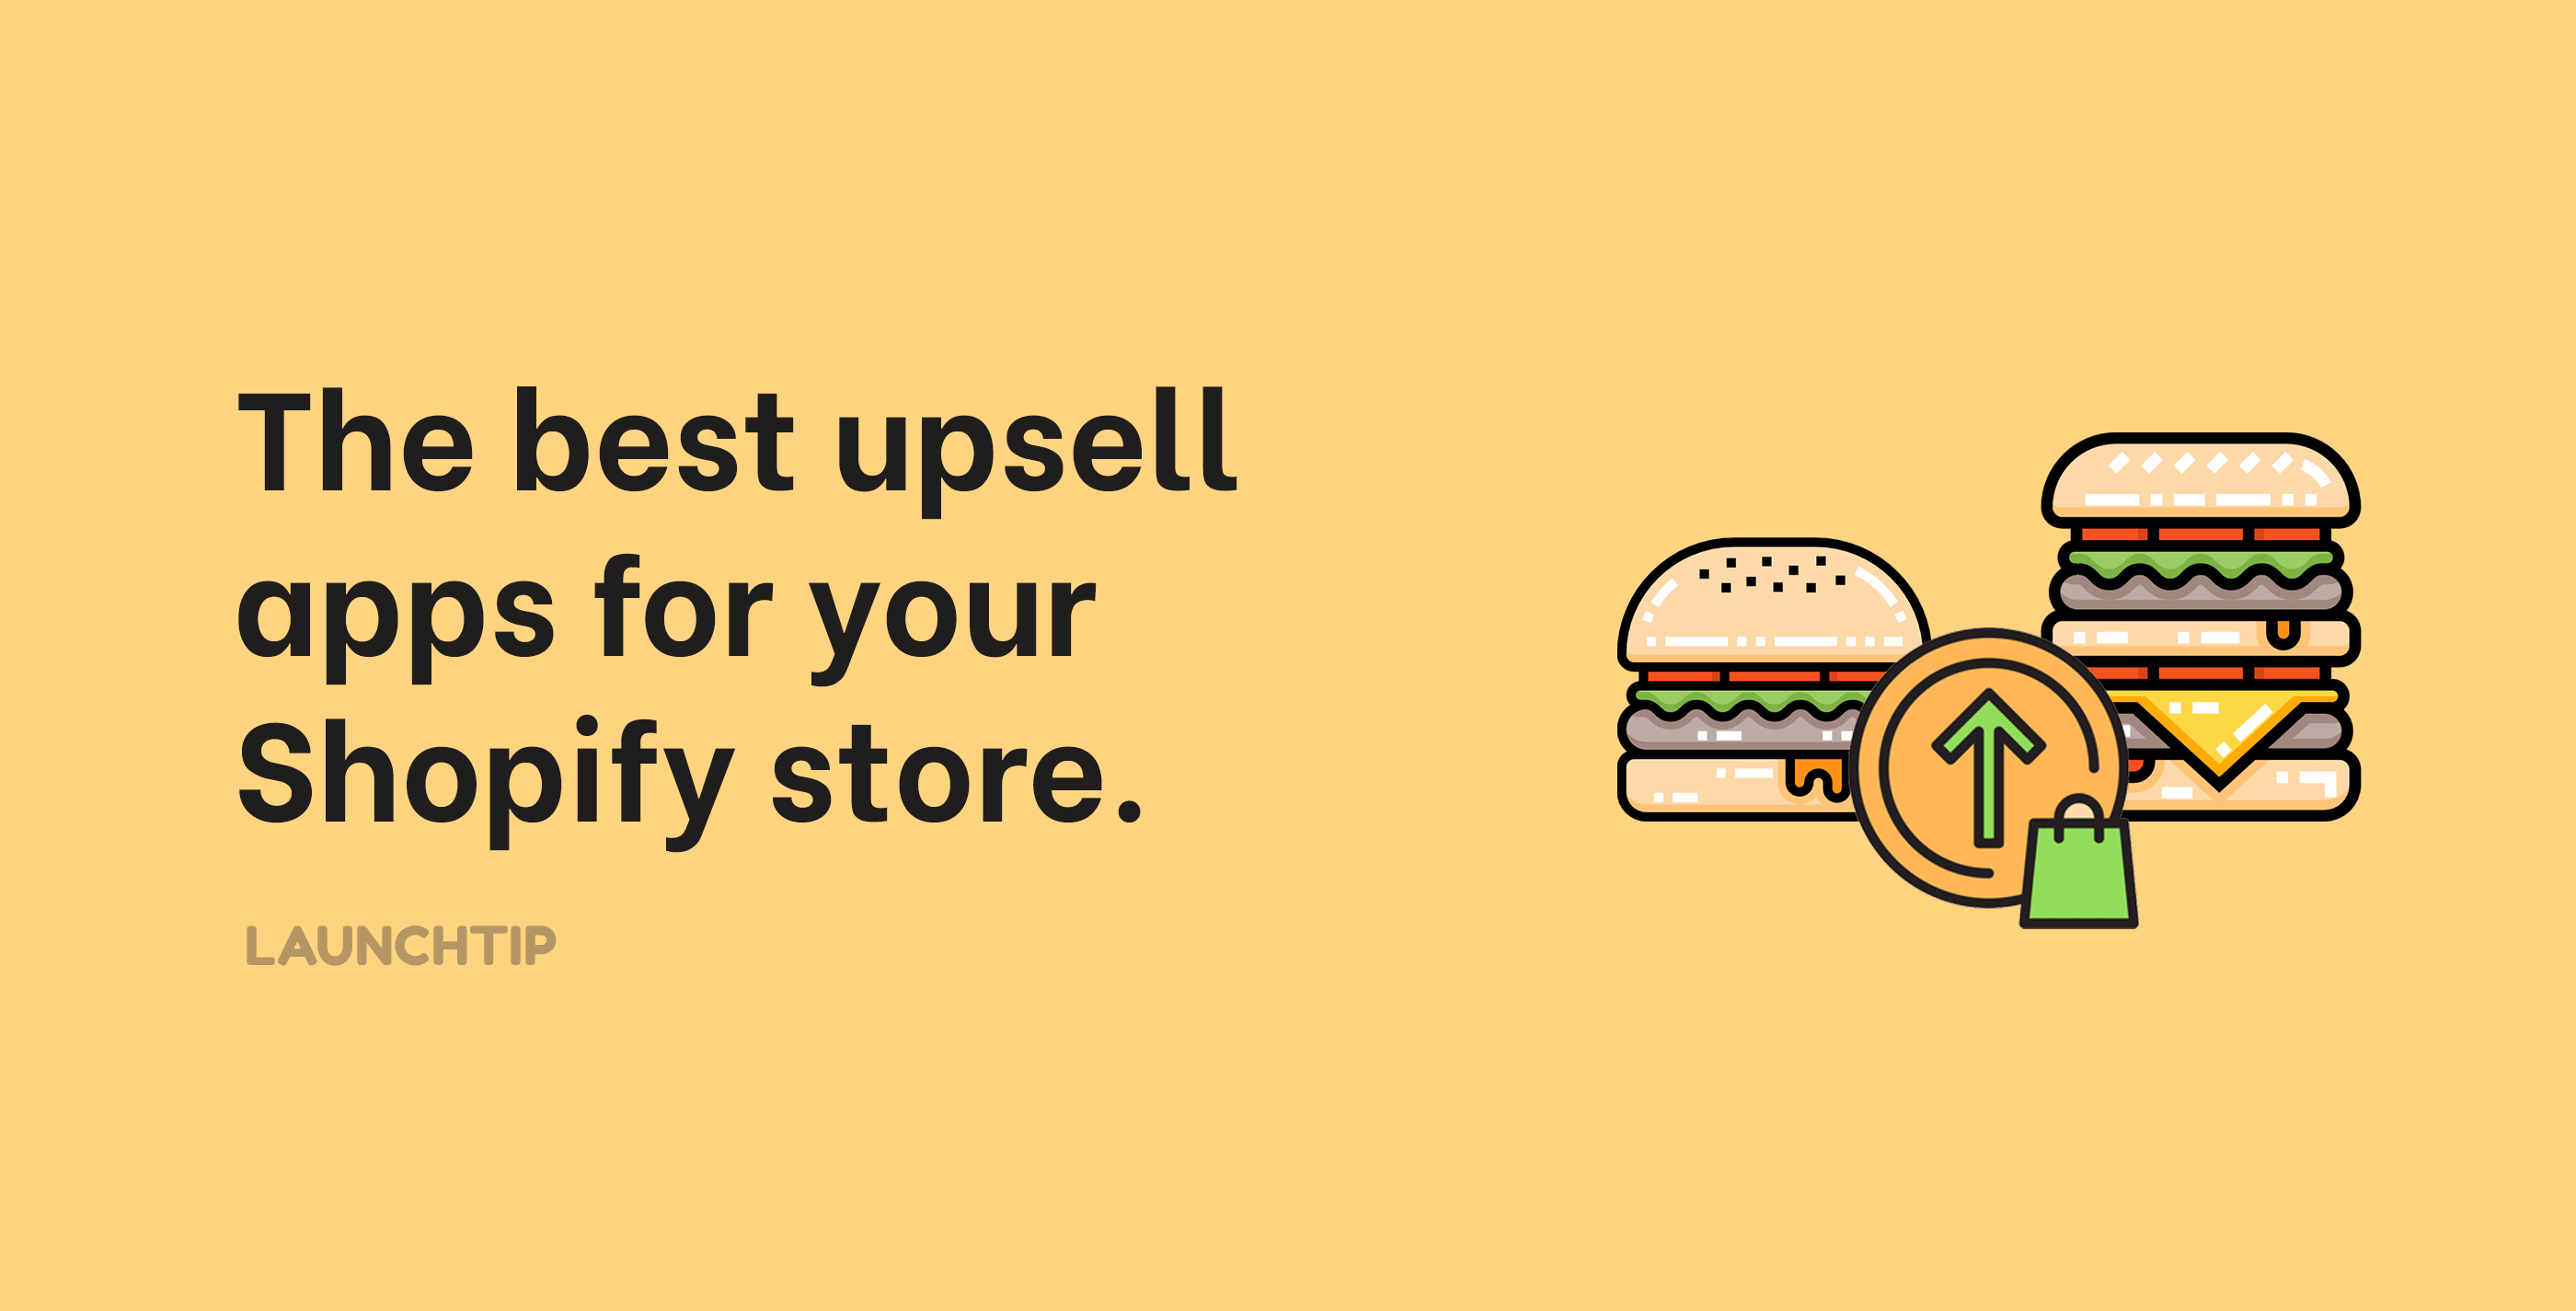 12 of the best upsell apps for your Shopify store in 2022